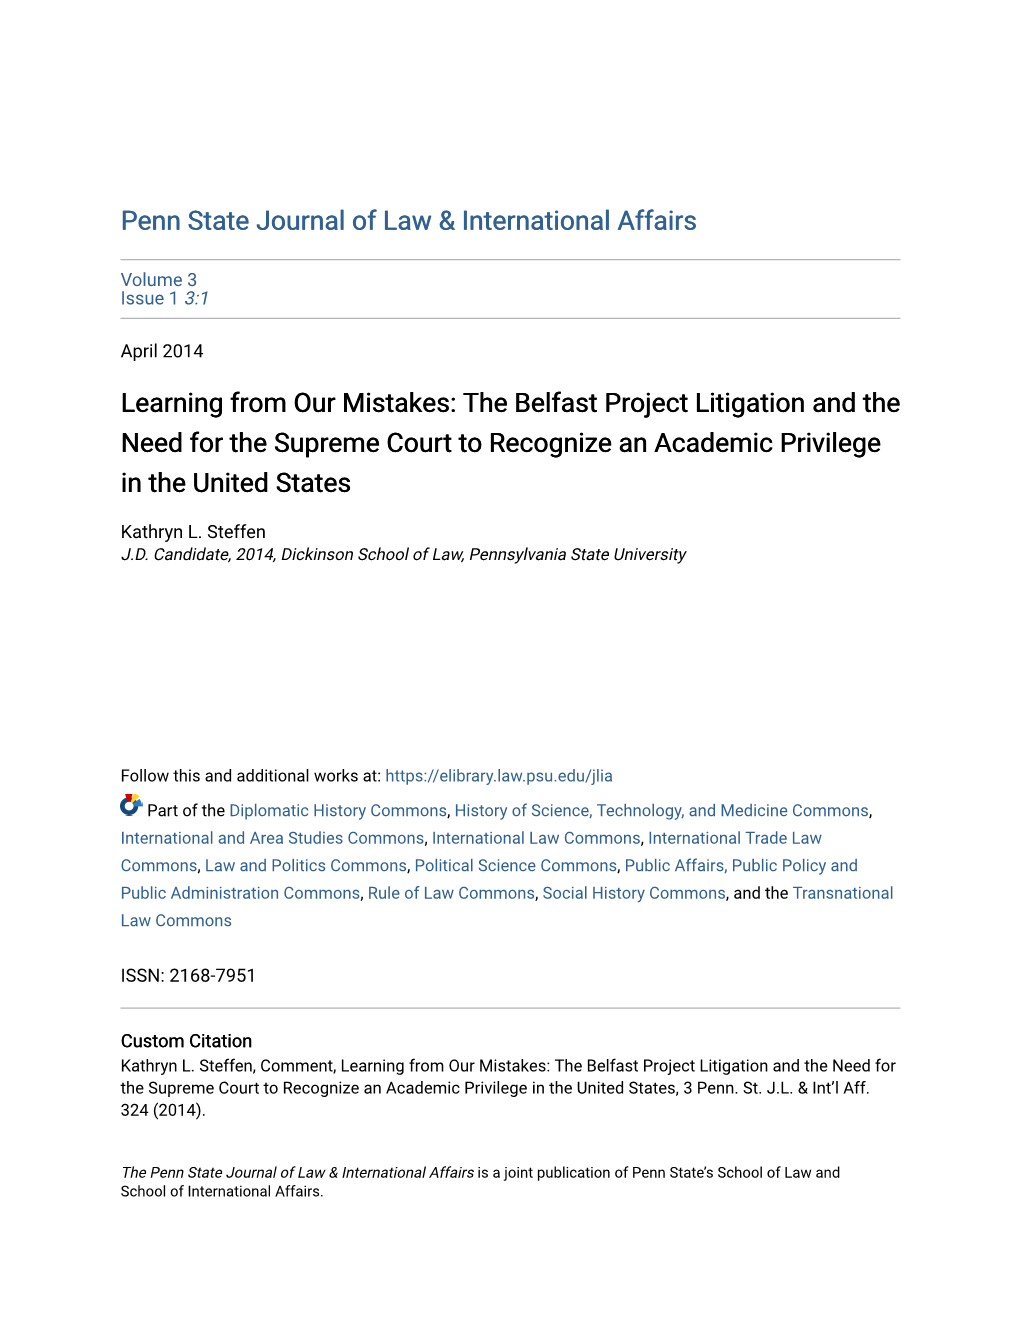 The Belfast Project Litigation and the Need for the Supreme Court to Recognize an Academic Privilege in the United States